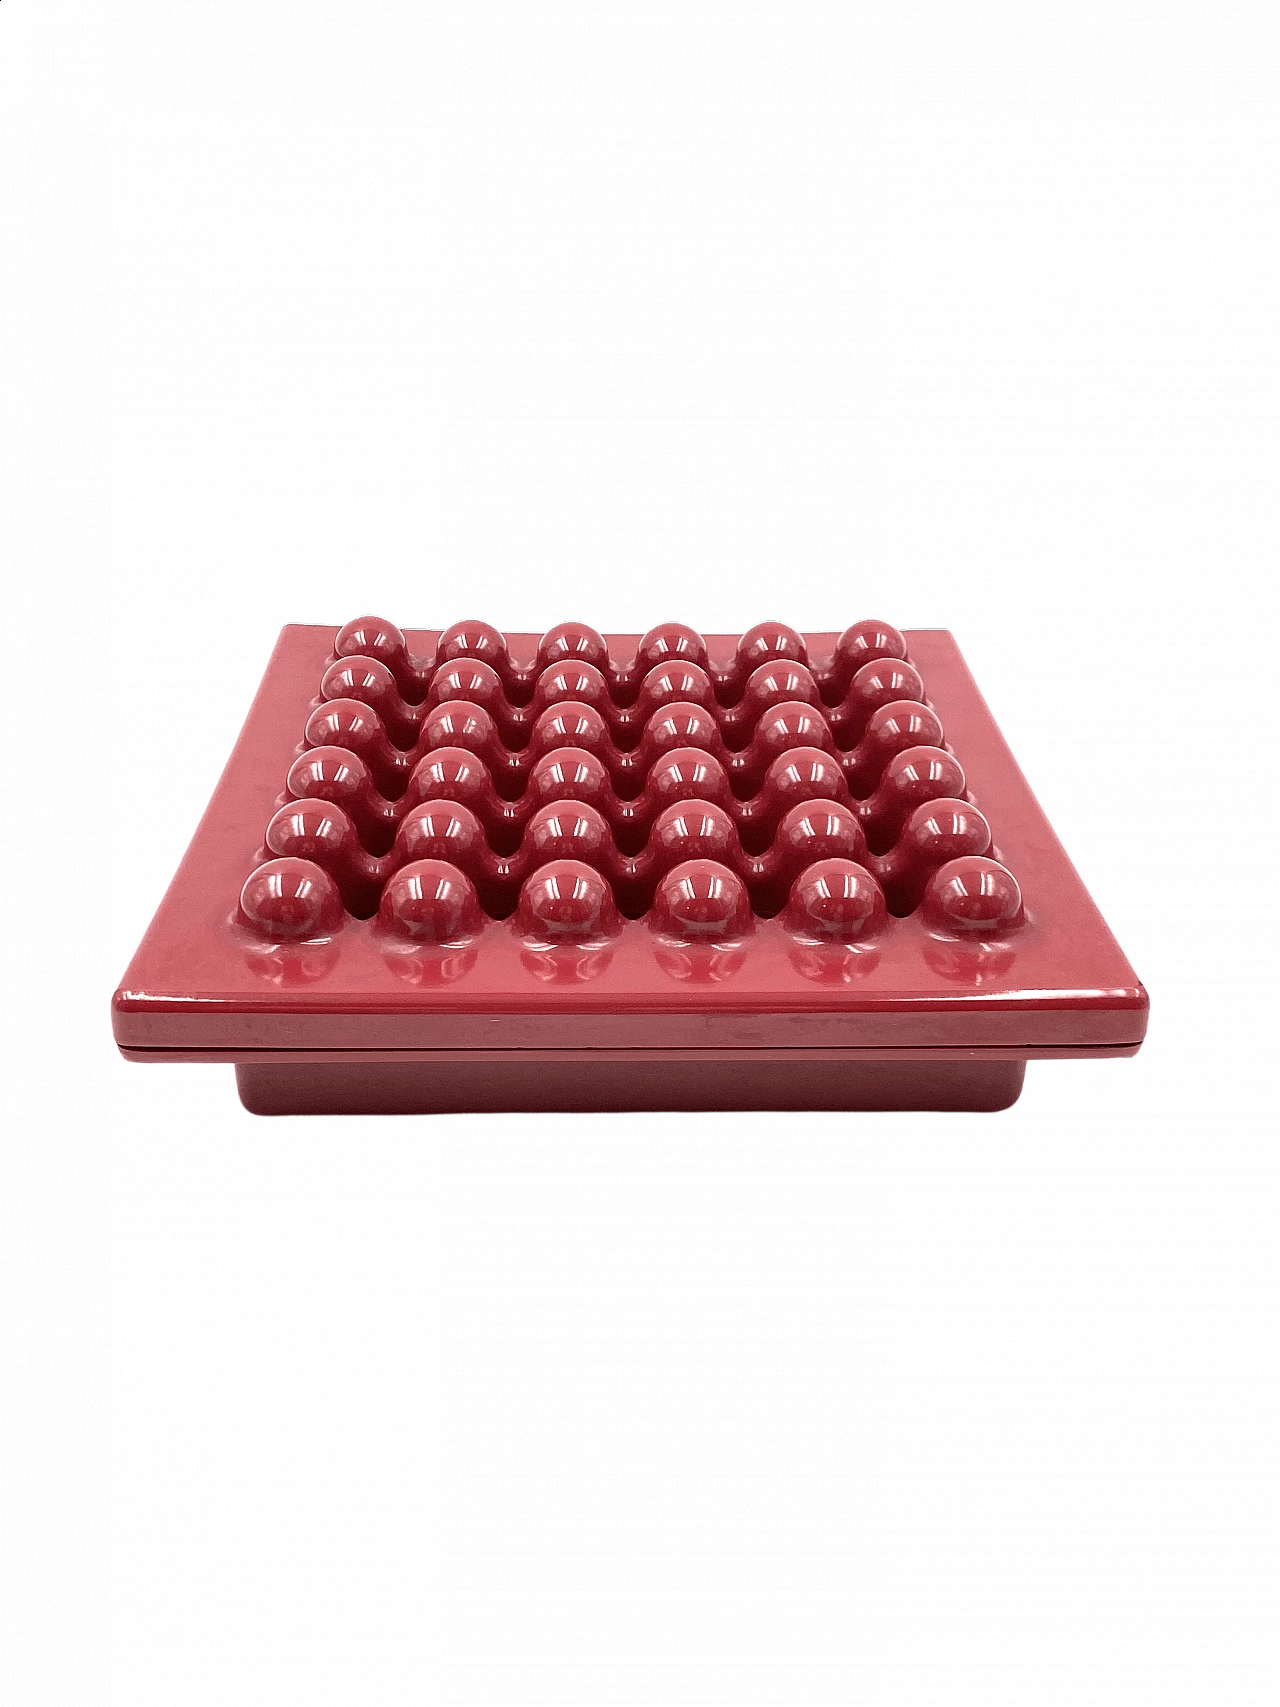 Large red wine ashtray by Ettore Sottsass for Olivetti Synthesis, Sistema 45 series, 1971 26